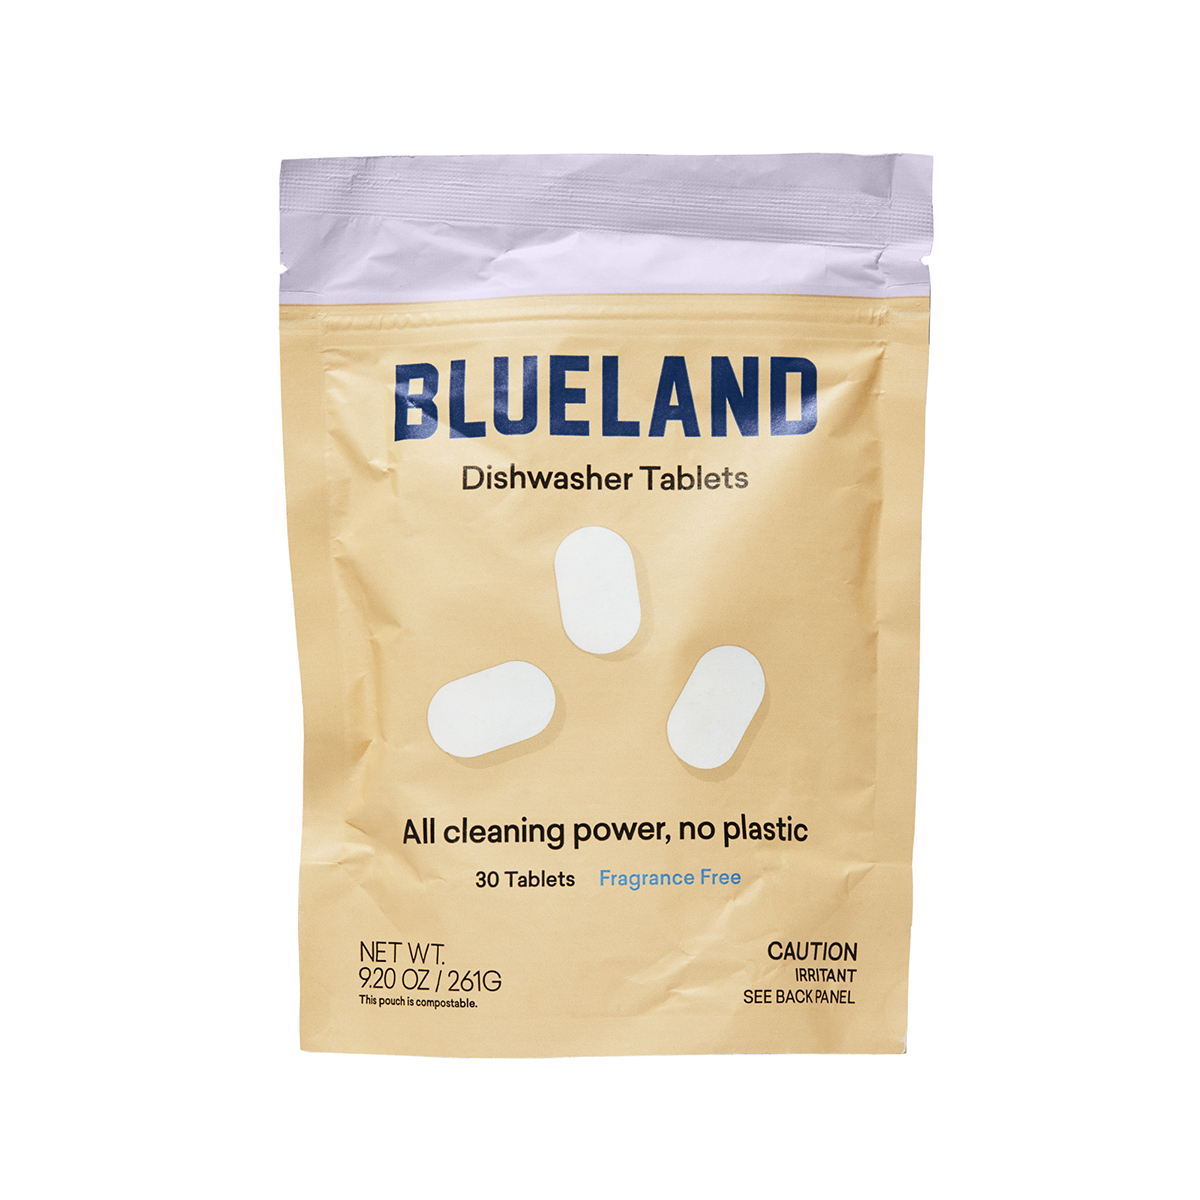 https://www.containerstore.com/catalogimages/475964/10084064-blueland-dishwasher-tabs-ve.jpg